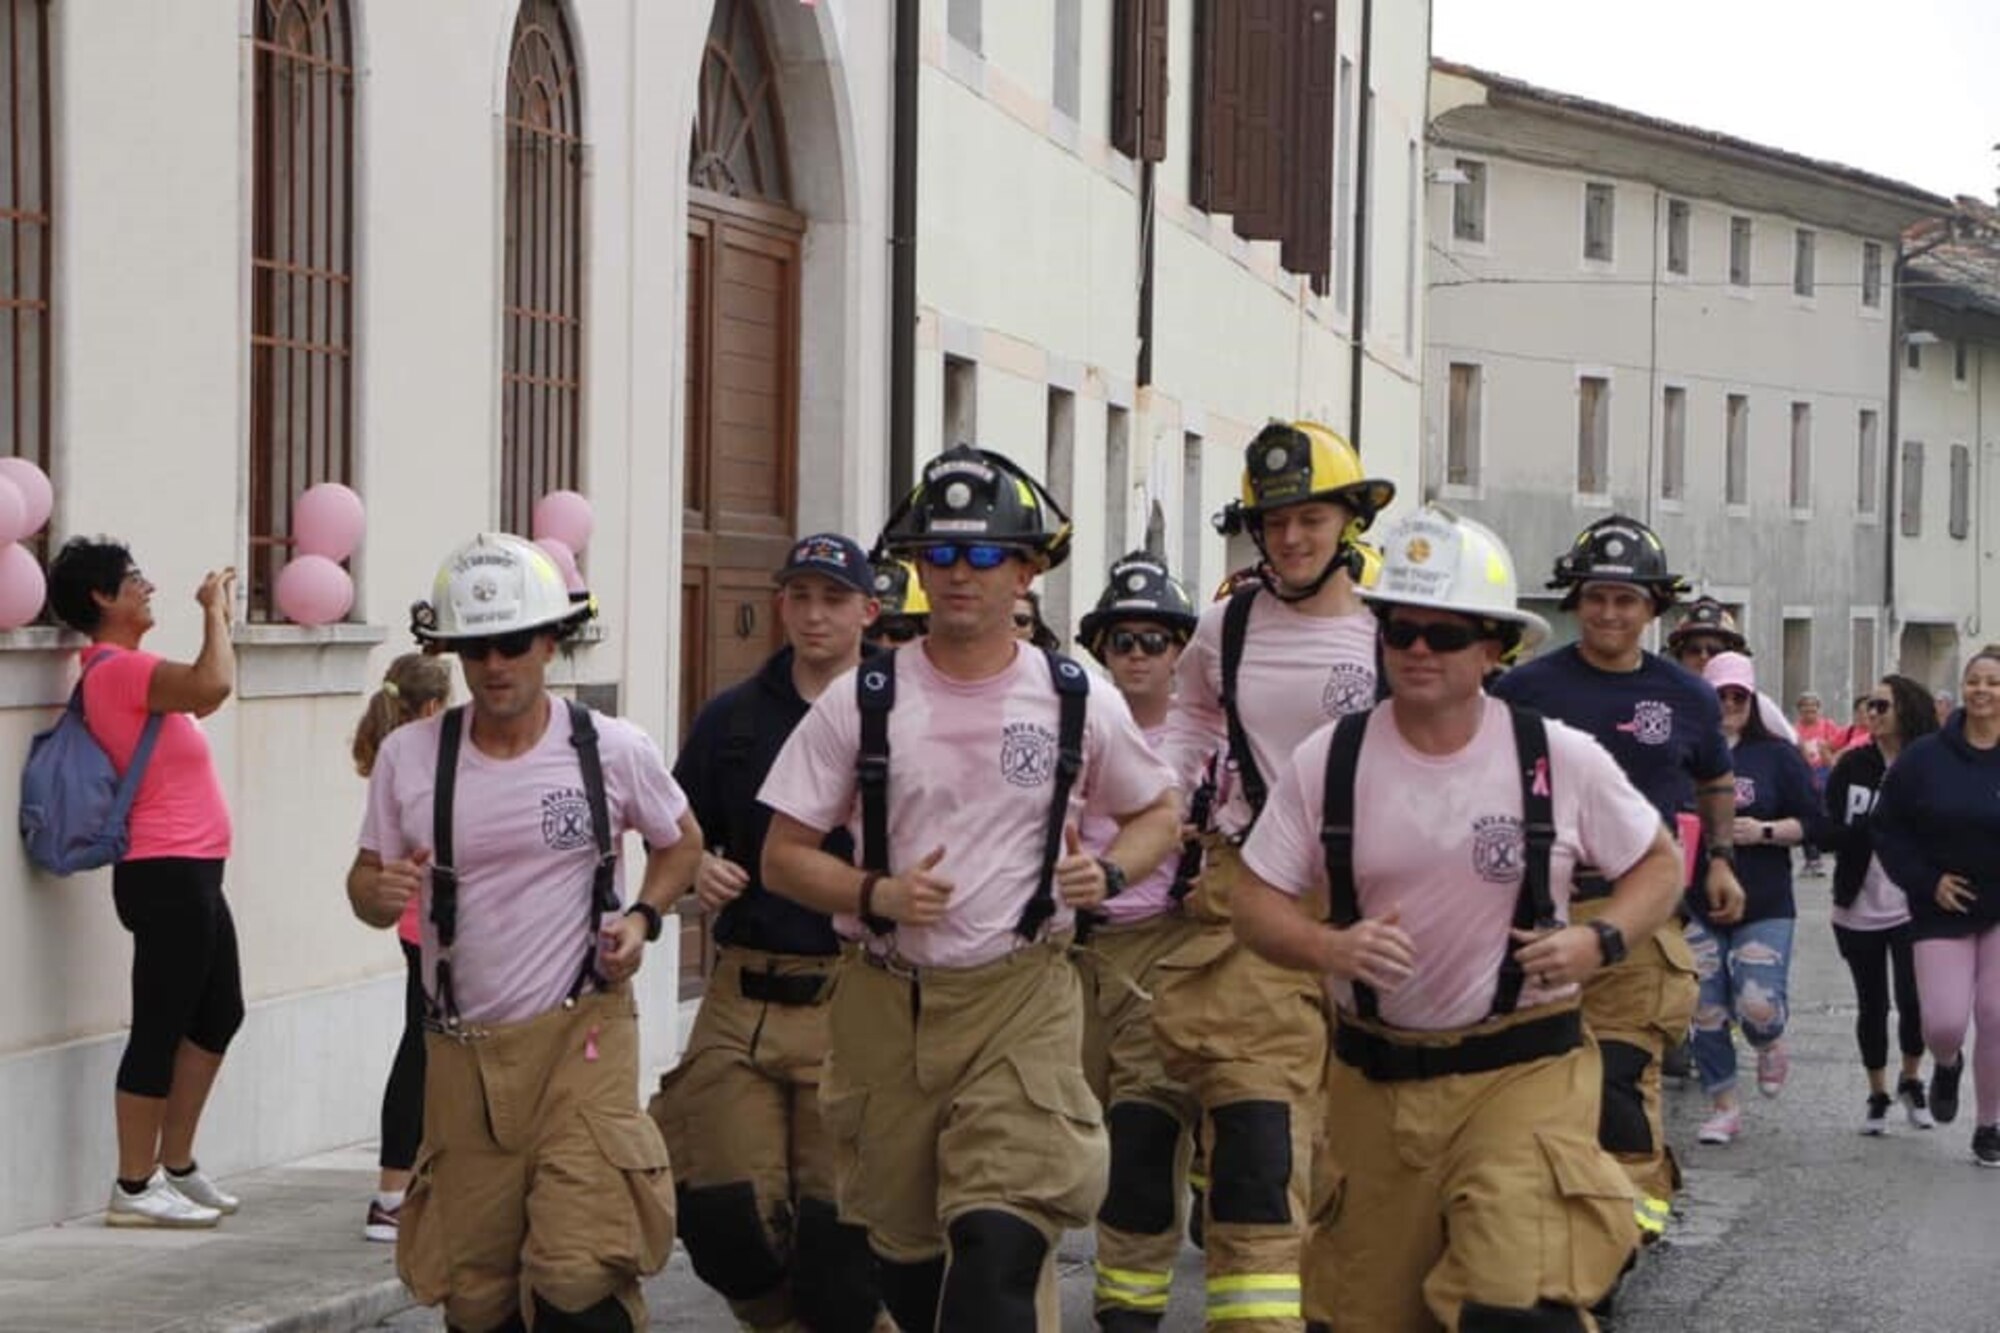 Members of the 31st Civil Engineer Squadron participate in a breast cancer awareness event in the Aviano Square, Italy, Oct. 13, 2019. The Aviano Firefighter Association sold shirts and hoodies to donate money to a local hospital for breast cancer awareness month. (Courtesy photo)